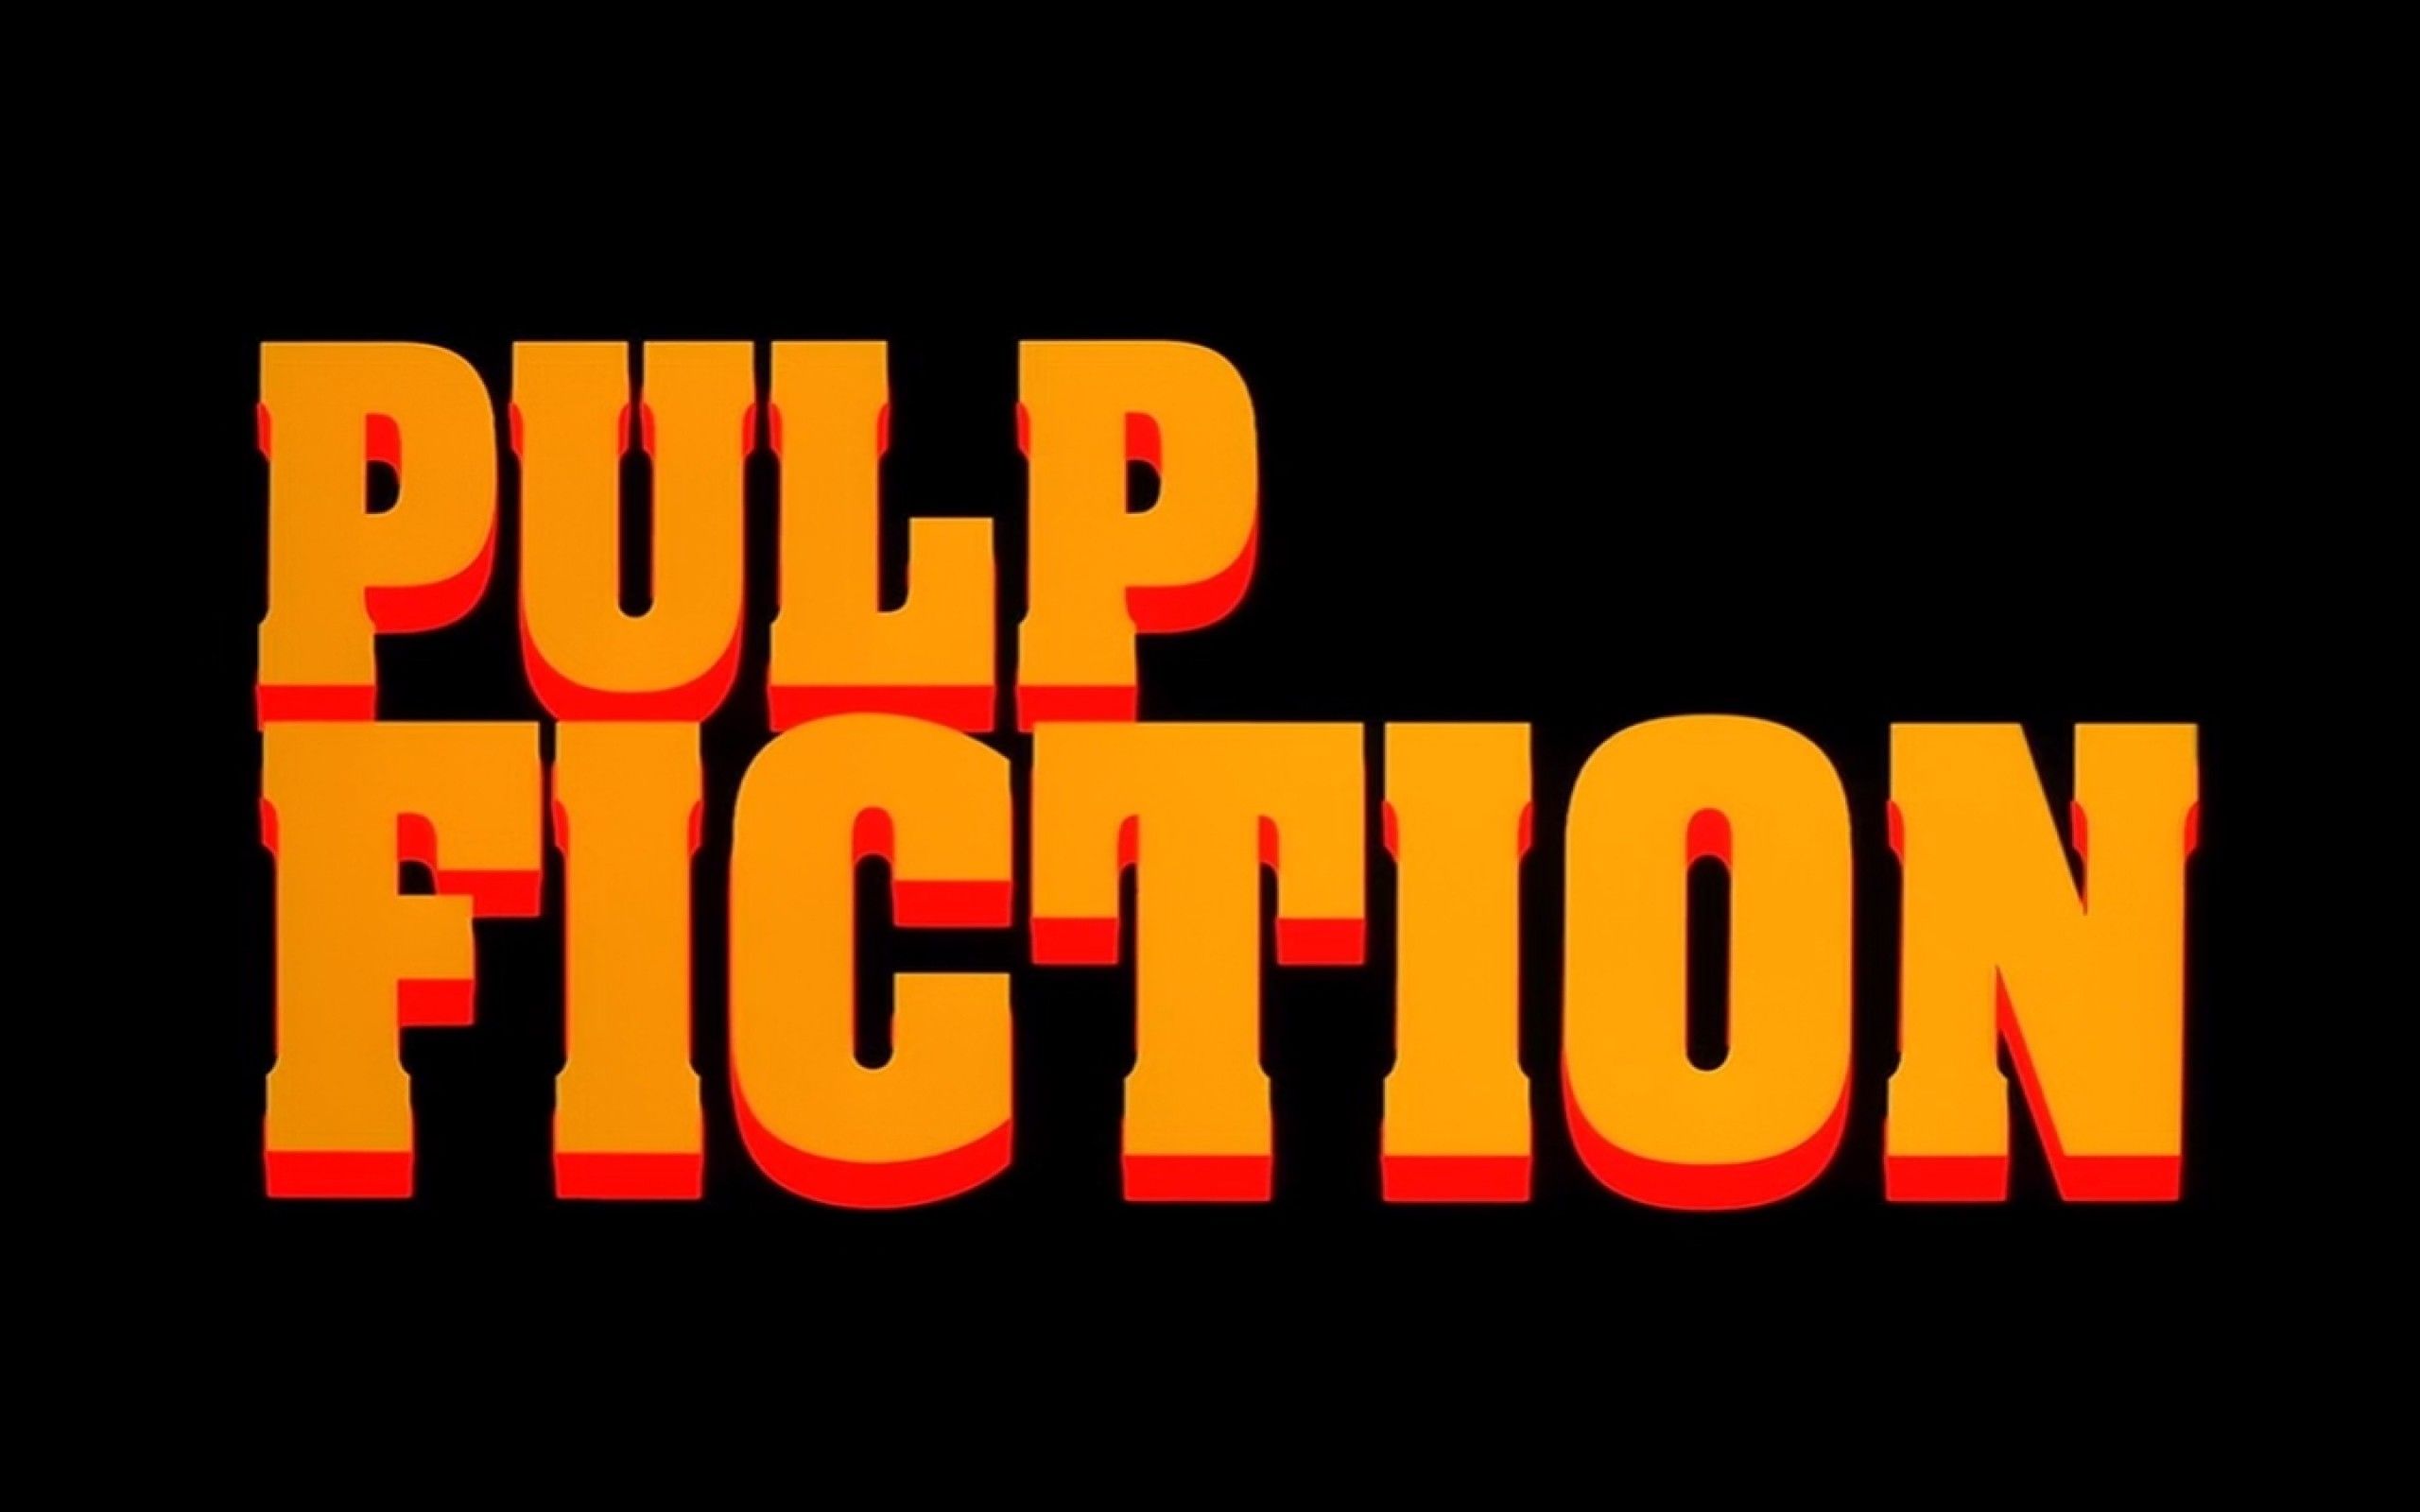 Pulp Fiction Wallpaper HD. Background. Photo. Image